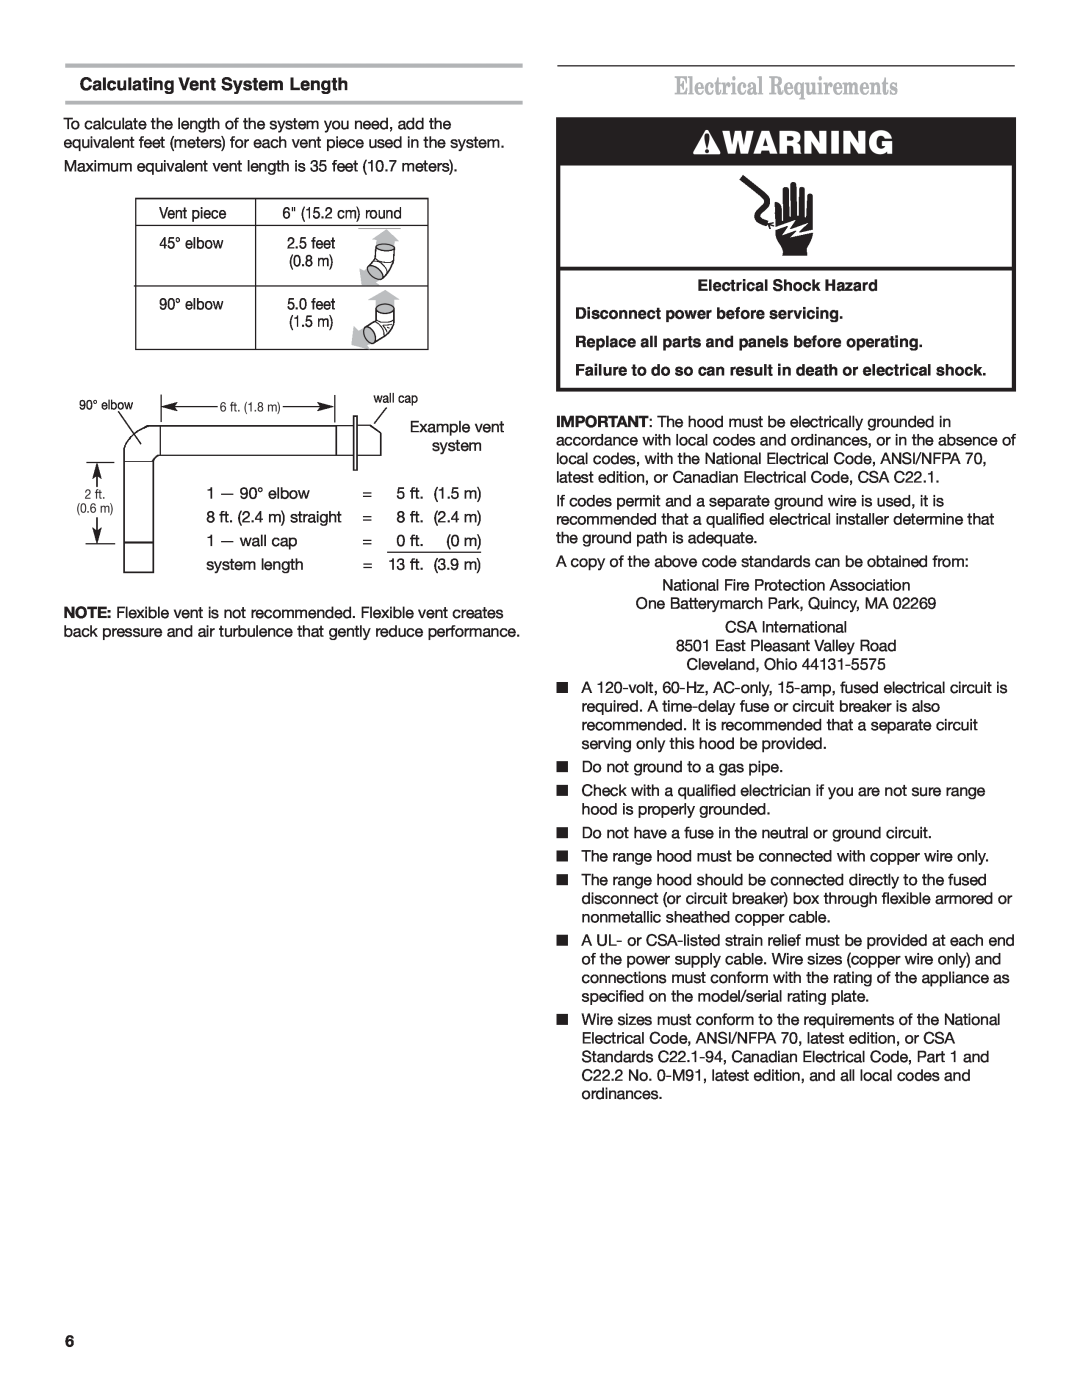 KitchenAid 9760425A Electrical Requirements, Calculating Vent System Length, Replace all parts and panels before operating 